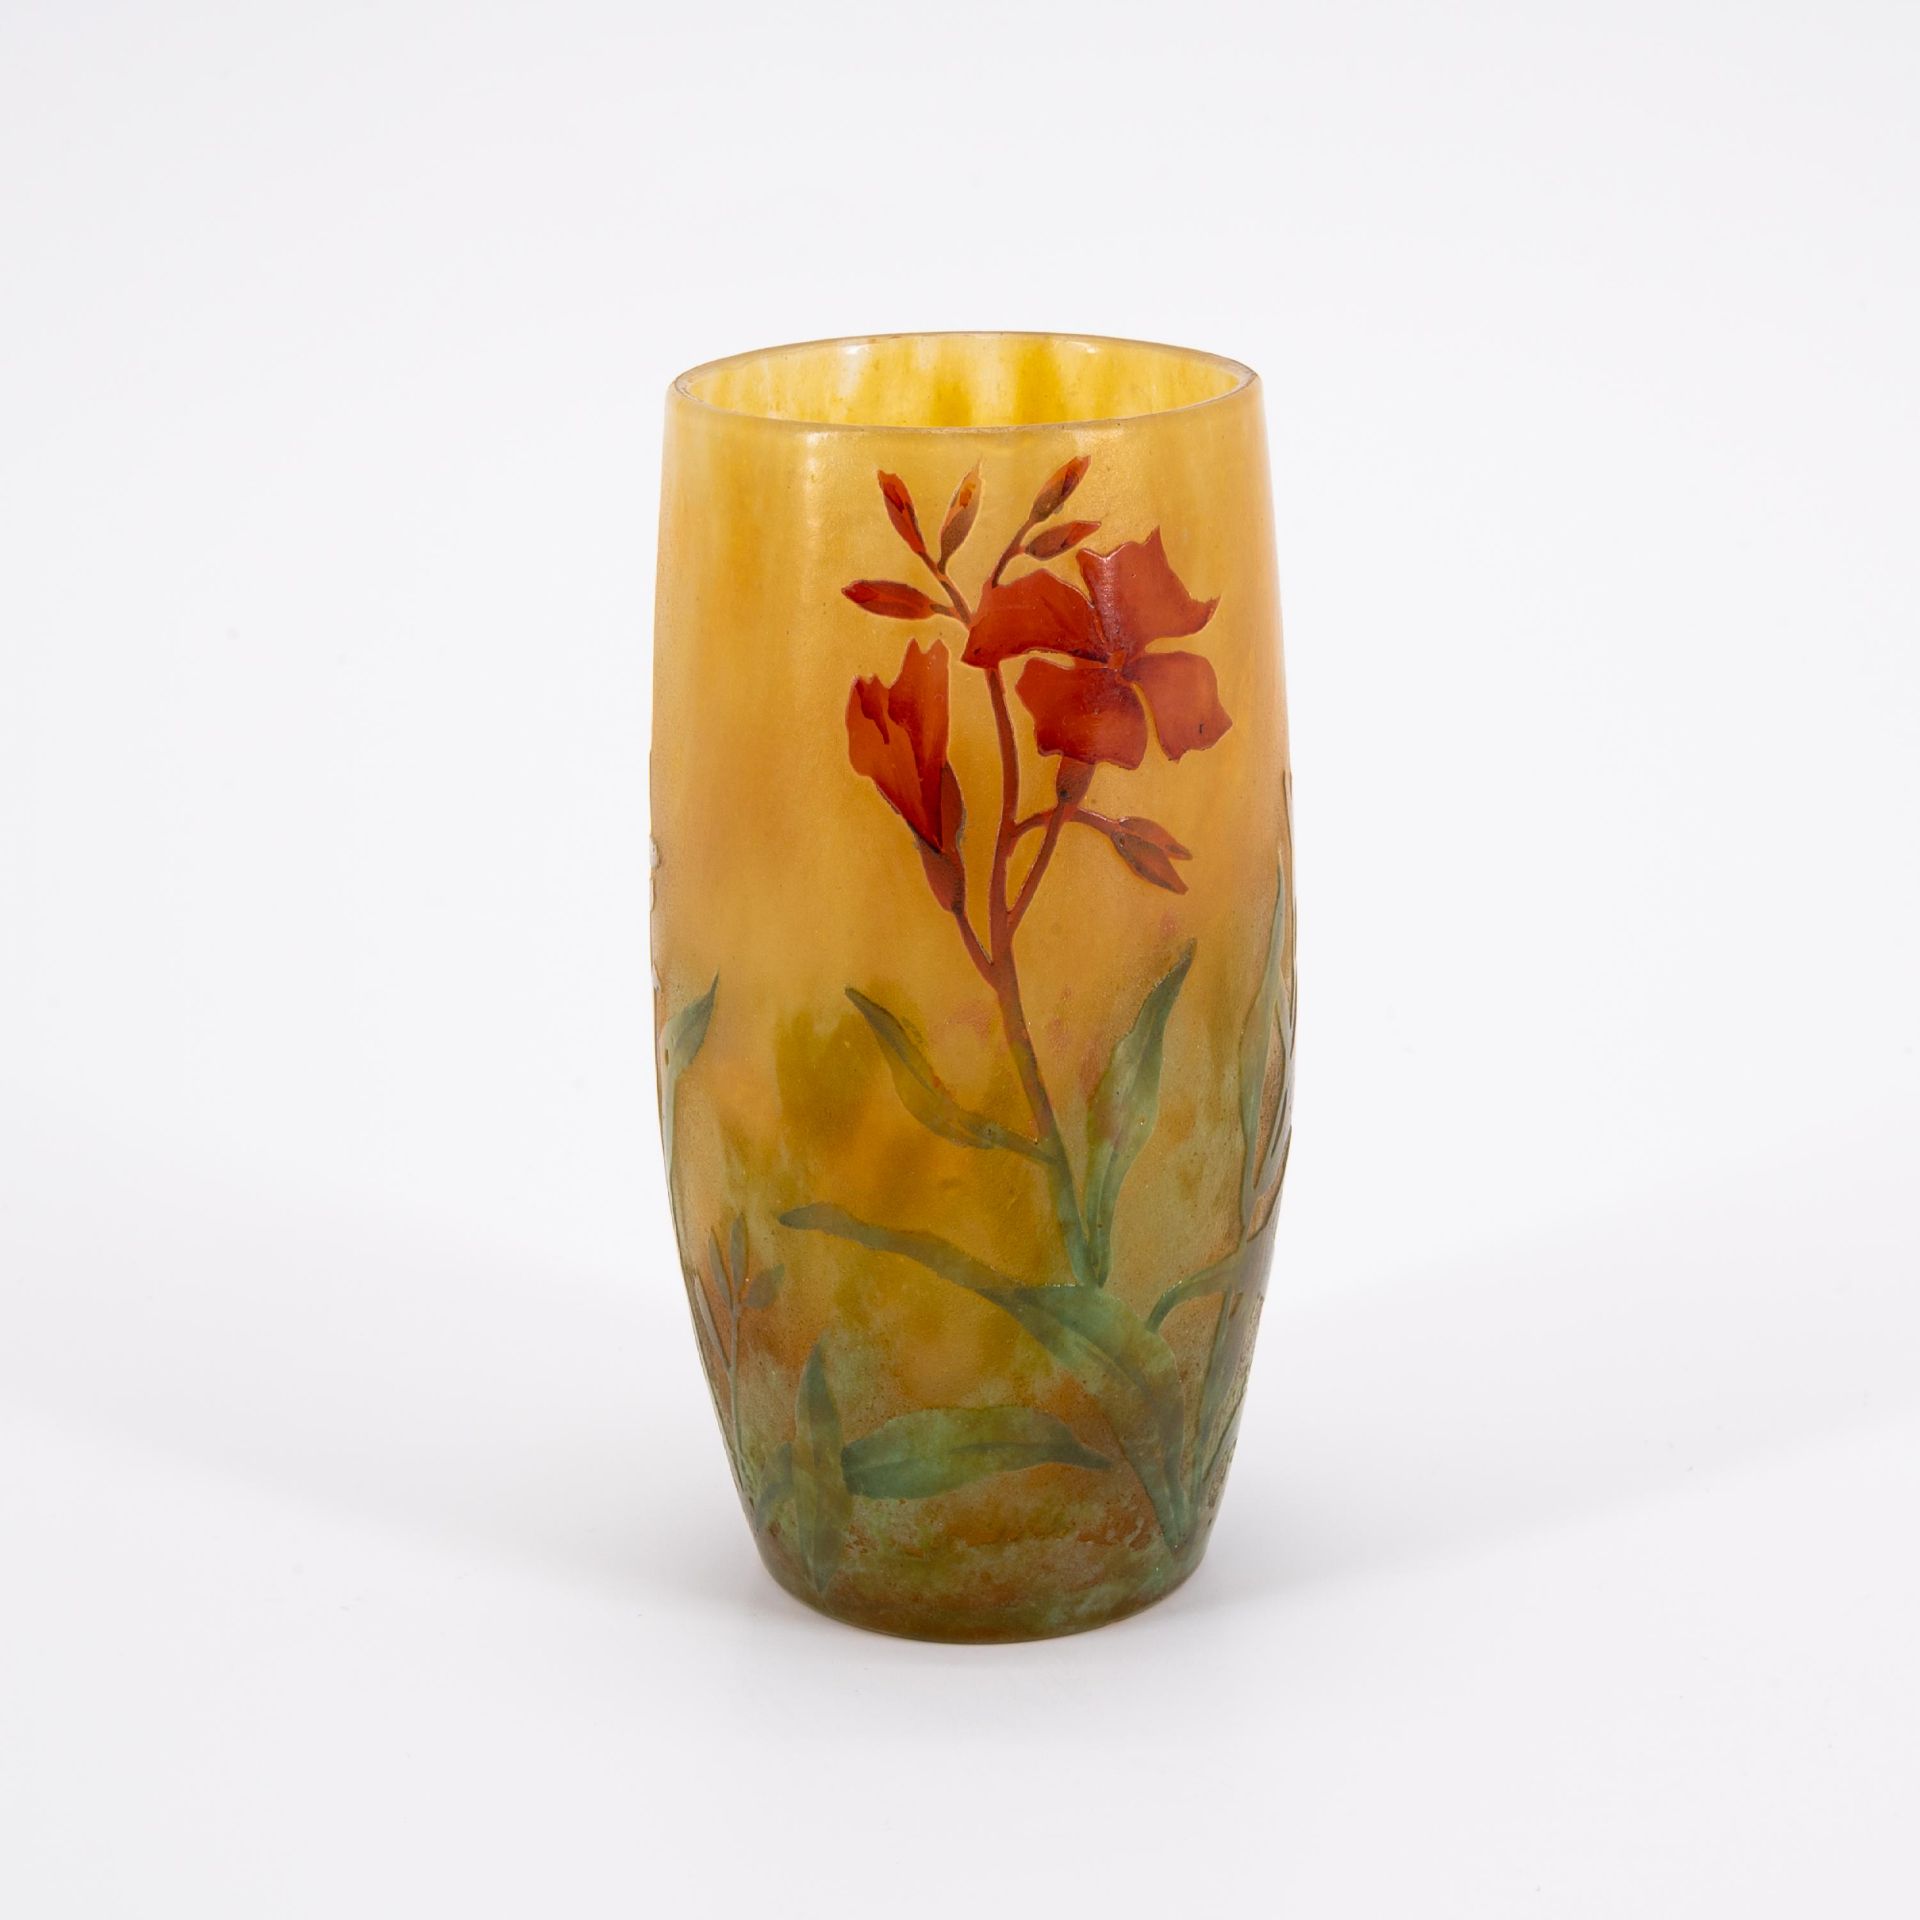 Daum Frères: SMALL GLASS VASE WITH FLOWER DECOR - Image 3 of 7